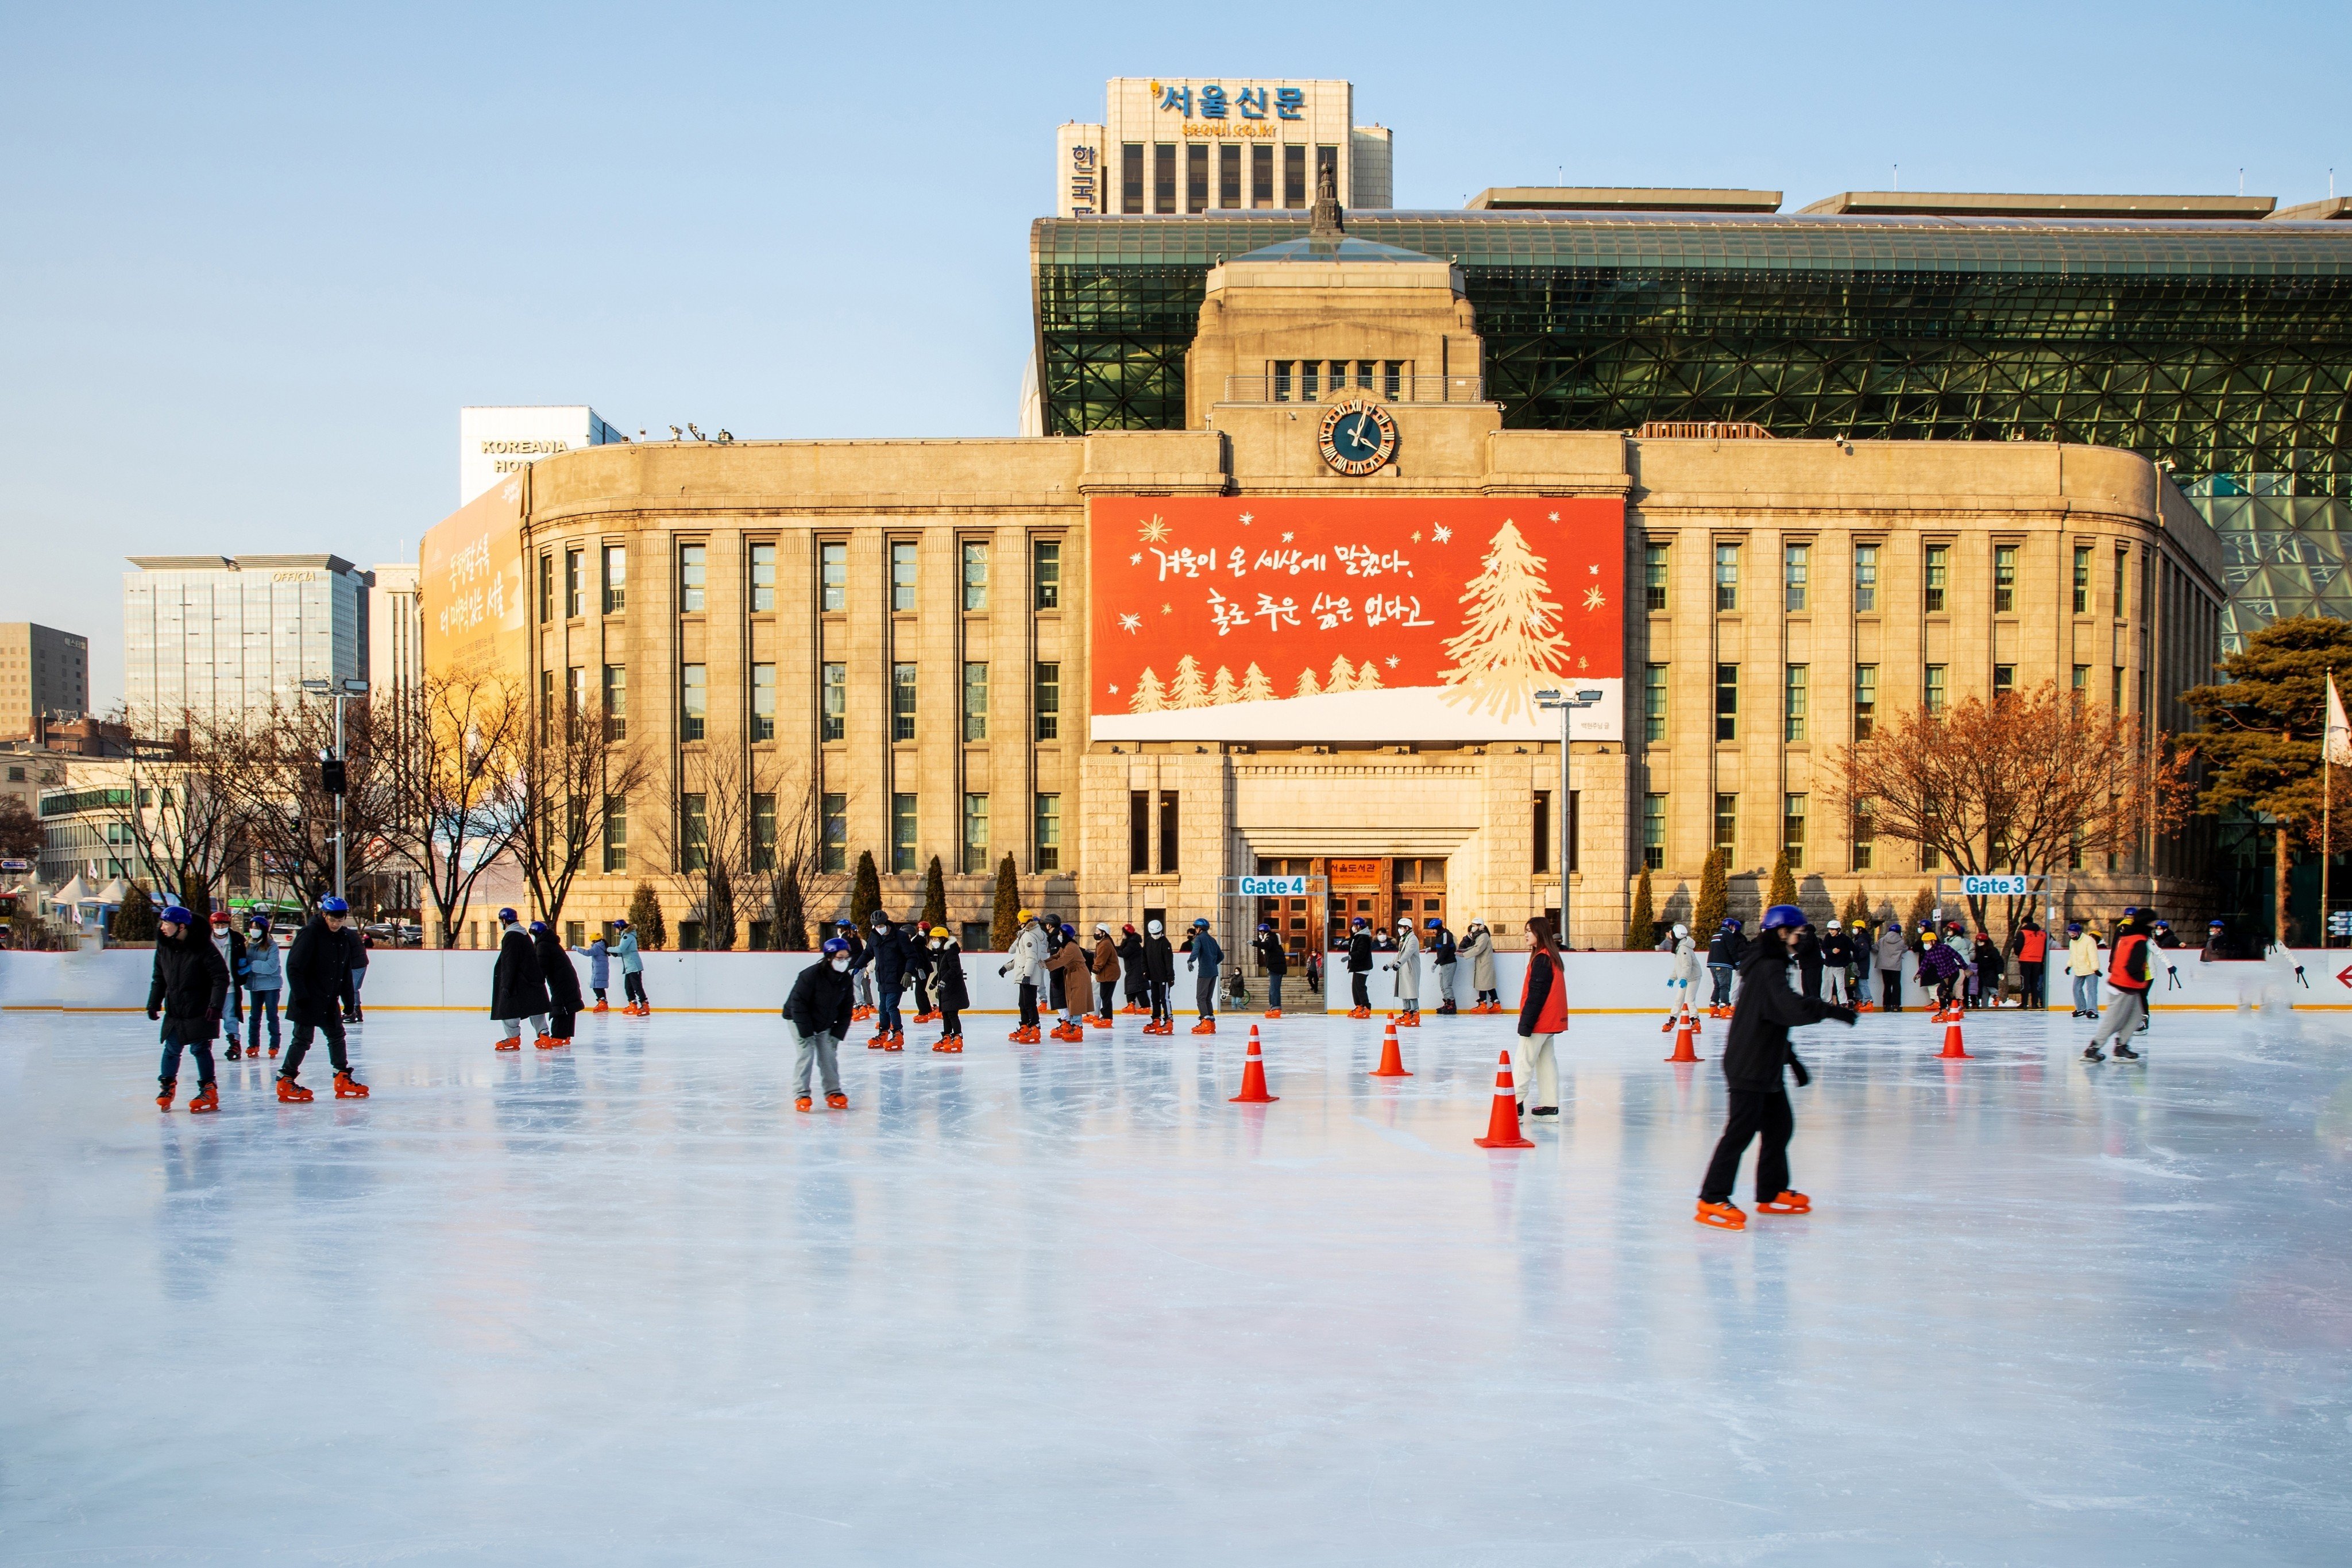 People ice skate at the Seoul Plaza Ice Skating Rink in Jung-gu, Seoul, South Korea, on January 5, 2023. The rink is among the best you can find in Seoul during the winter months. Photo: Shutterstock